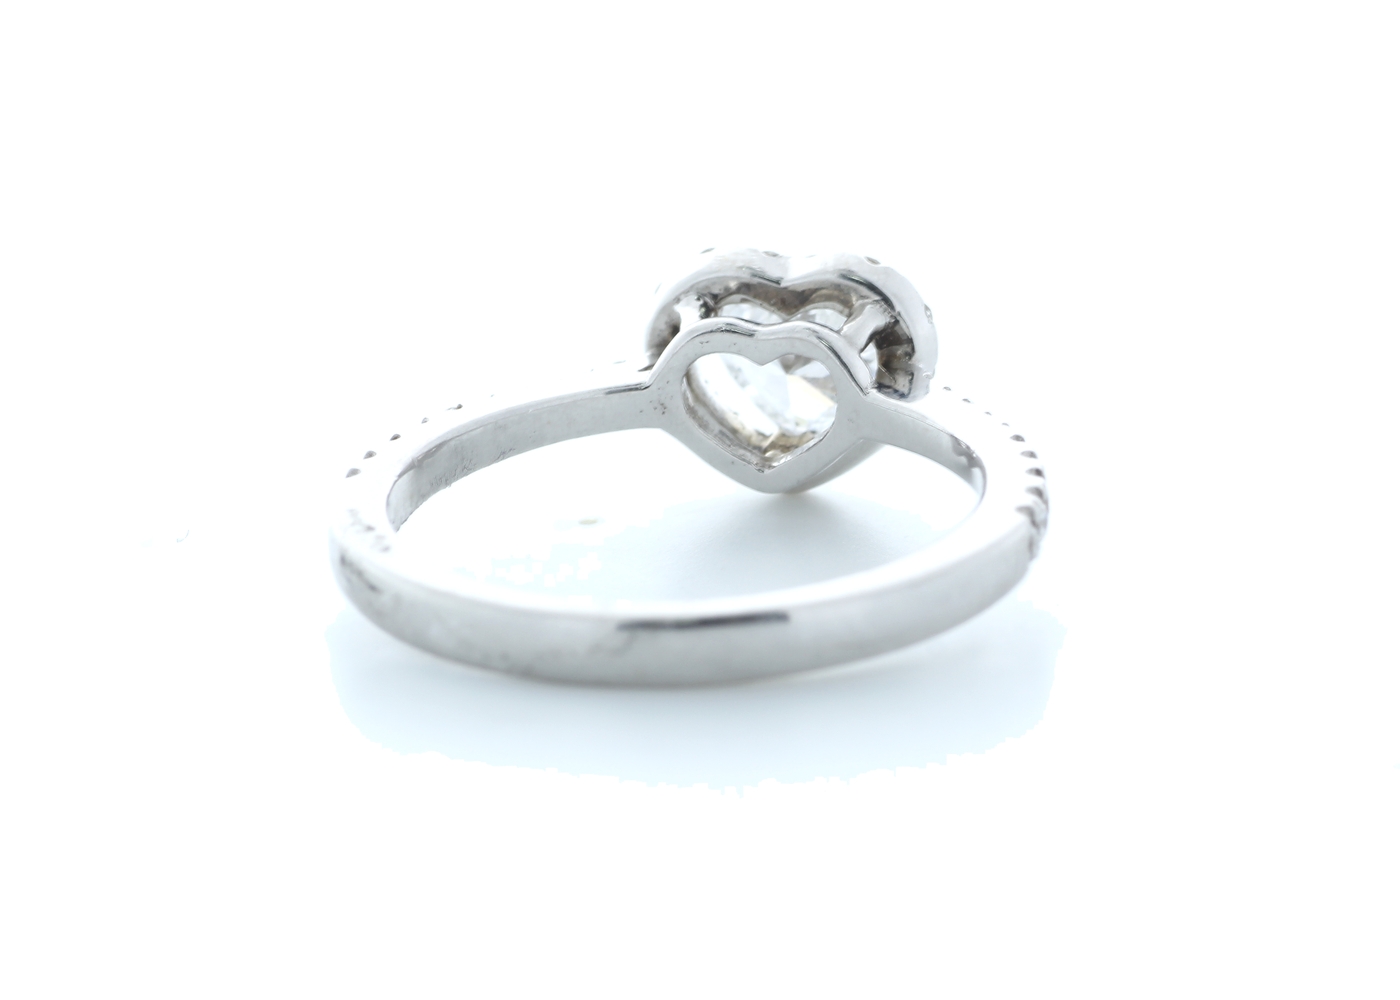 18ct White Gold Heart Shape Diamond With Halo Setting Ring 0.77 (0.45) Carats - Image 3 of 5